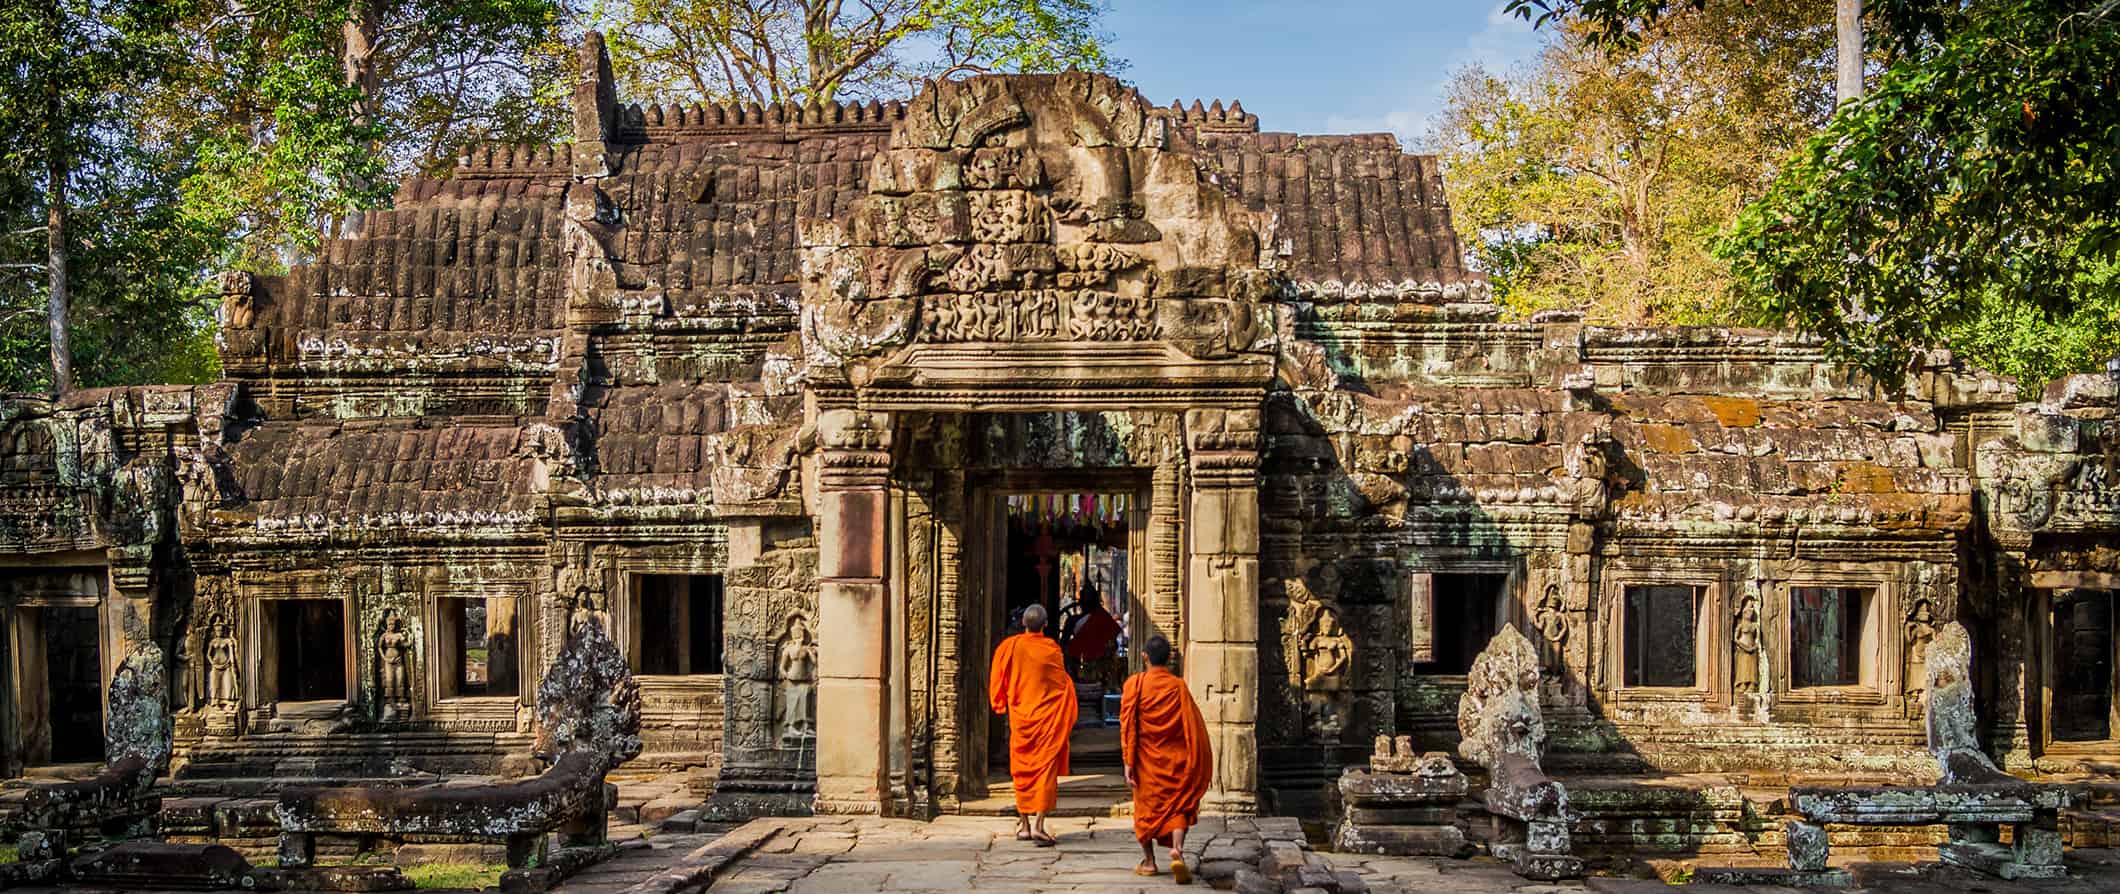 a view of cambodia's angkor wat temple, with monks walking inside